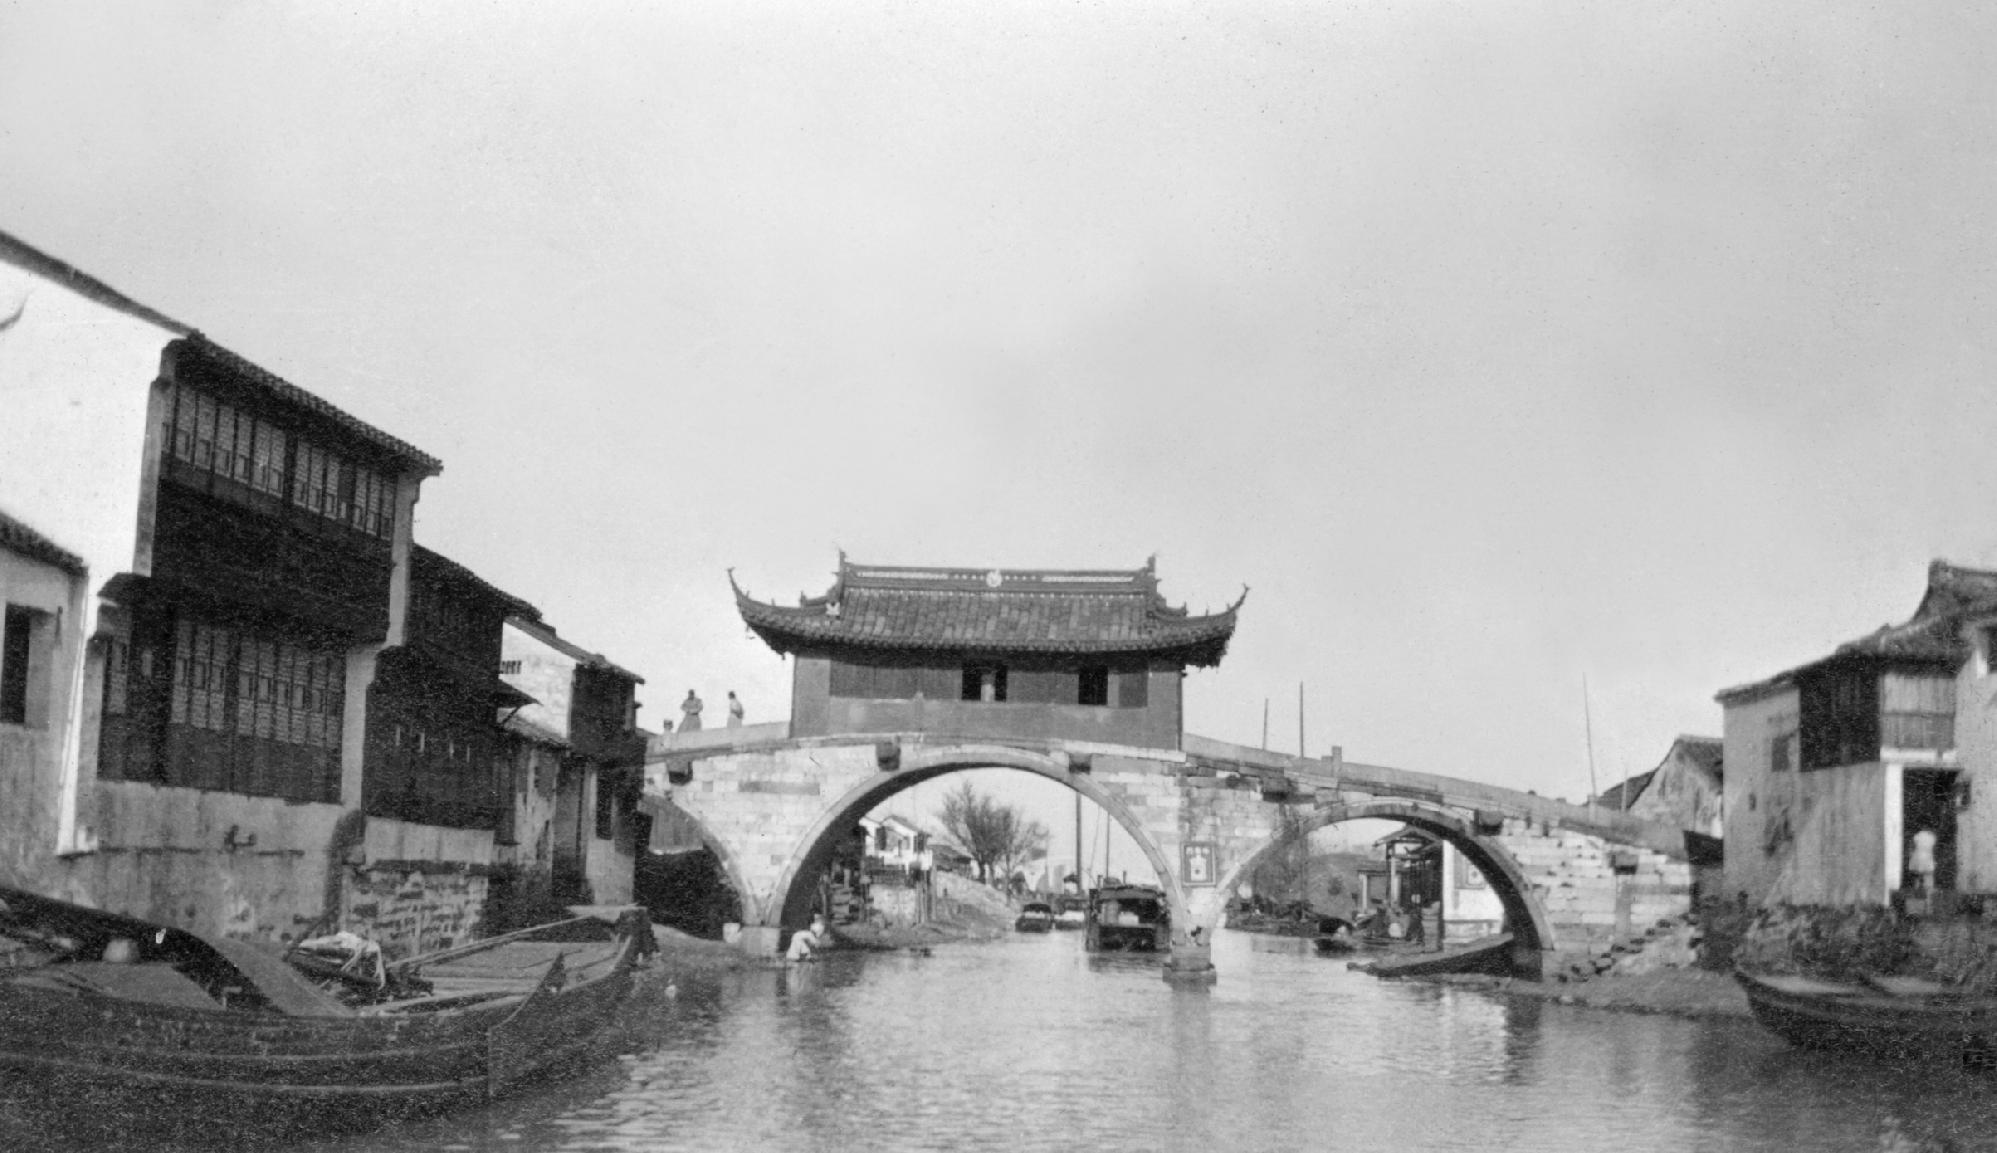 Bridge with three arches and a gallery in Suzhou 蘇州.